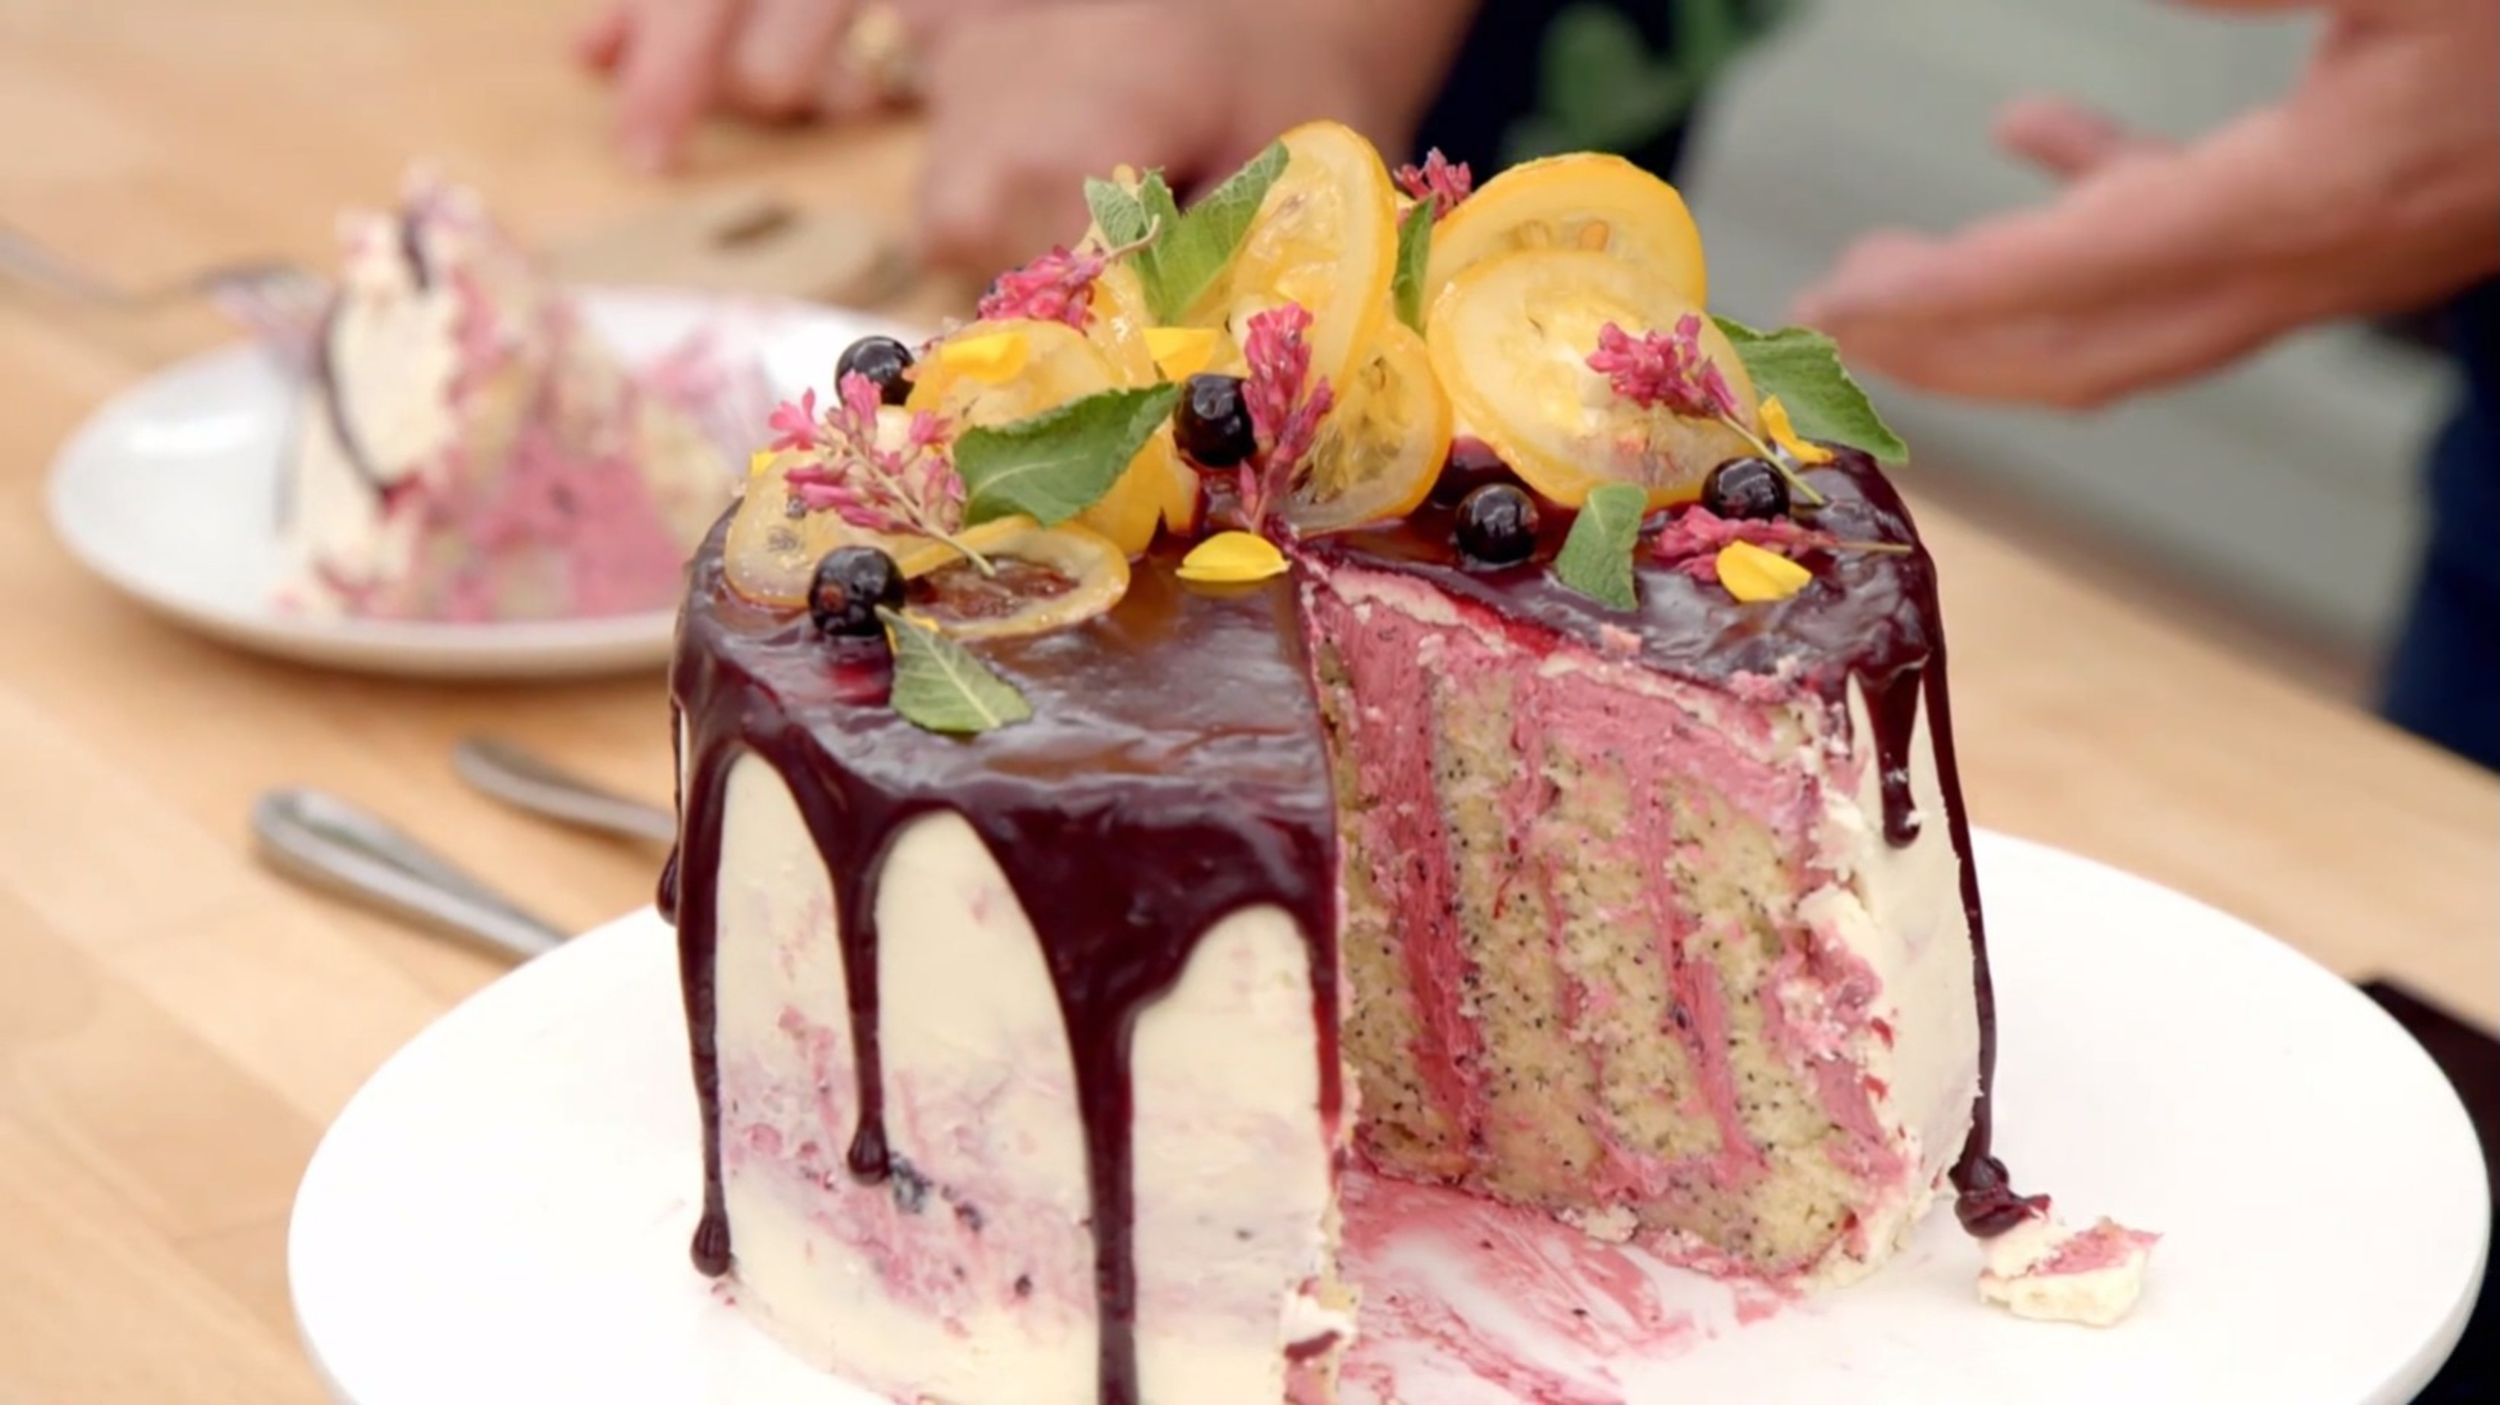 Abbi's Foraged Wild Poppy Seed, Lemon & Blackcurrant Vertical Layer Cake from the Cake Week Signature Challenge is perfectly decorated in The Great British Baking Show